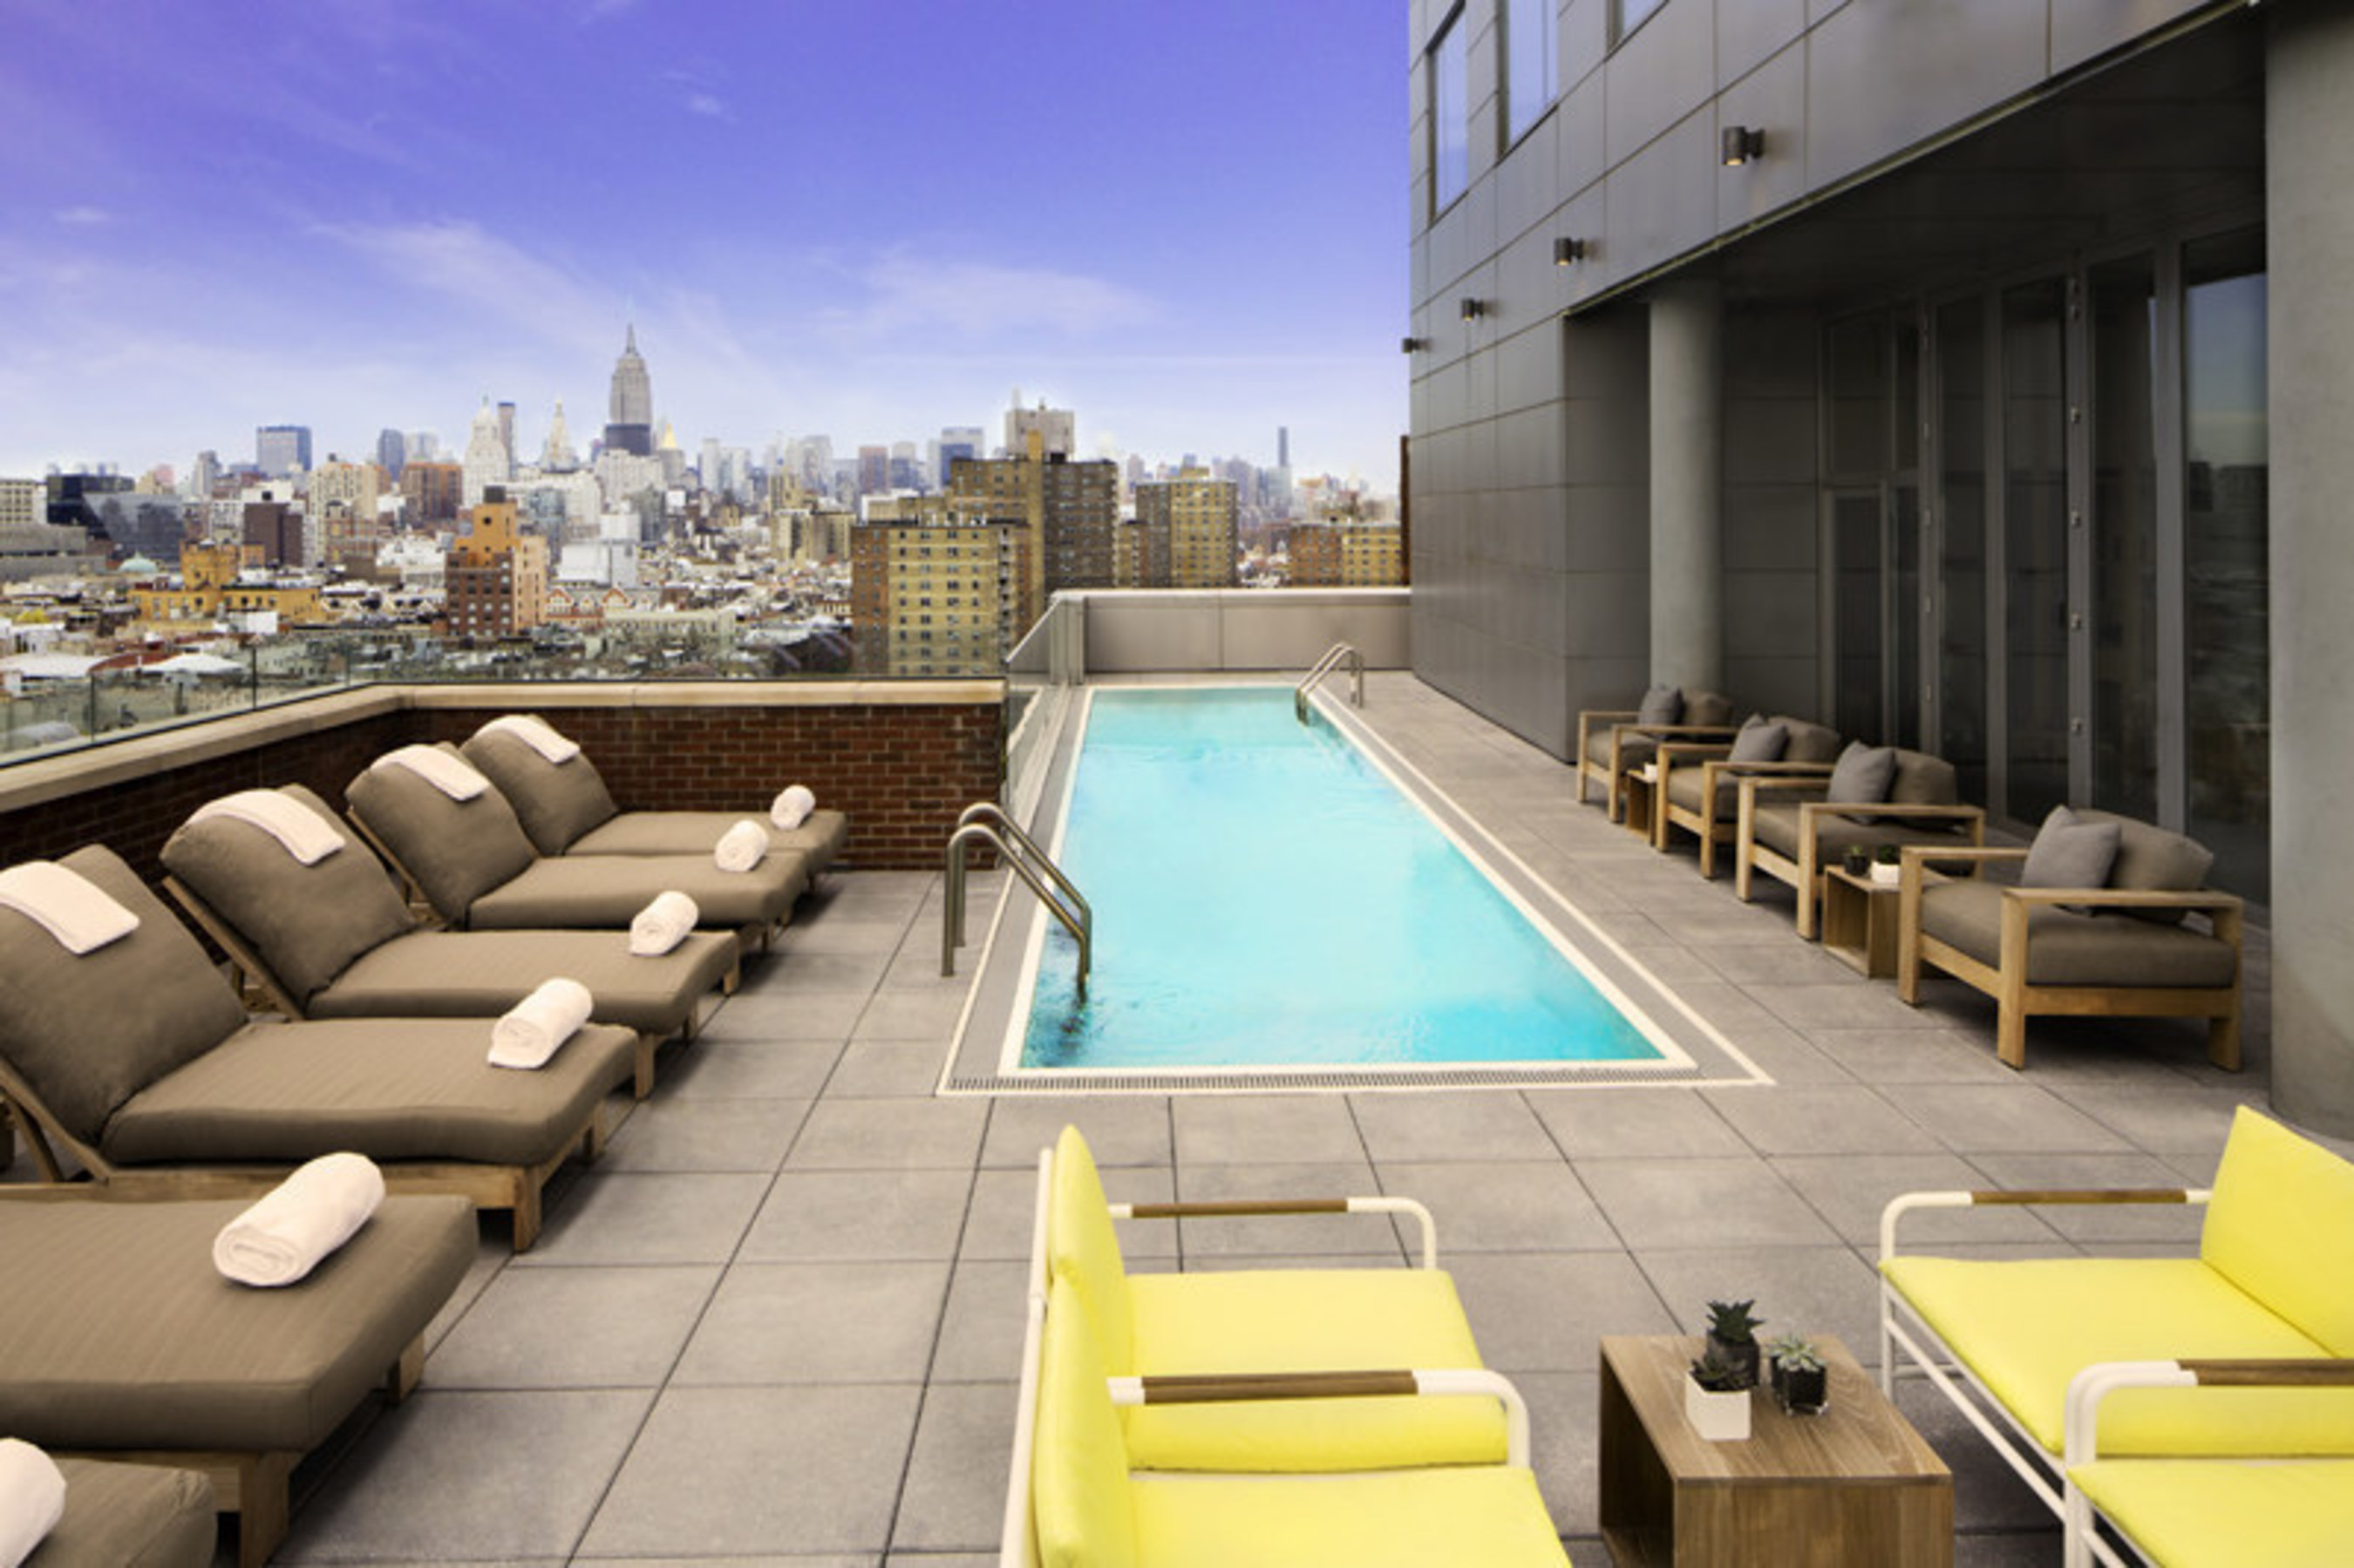 The impressive 5,000 sq. ft. terrace located on the west side of the 15th floor offers breathtaking views of Manhattan and is outfitted with its own swimming pool, bar and a variety of seating options - providing the perfect backdrop to enjoy locally crafted cocktails from the hotel's rooftop bar & restaurant, Mr. Purple.